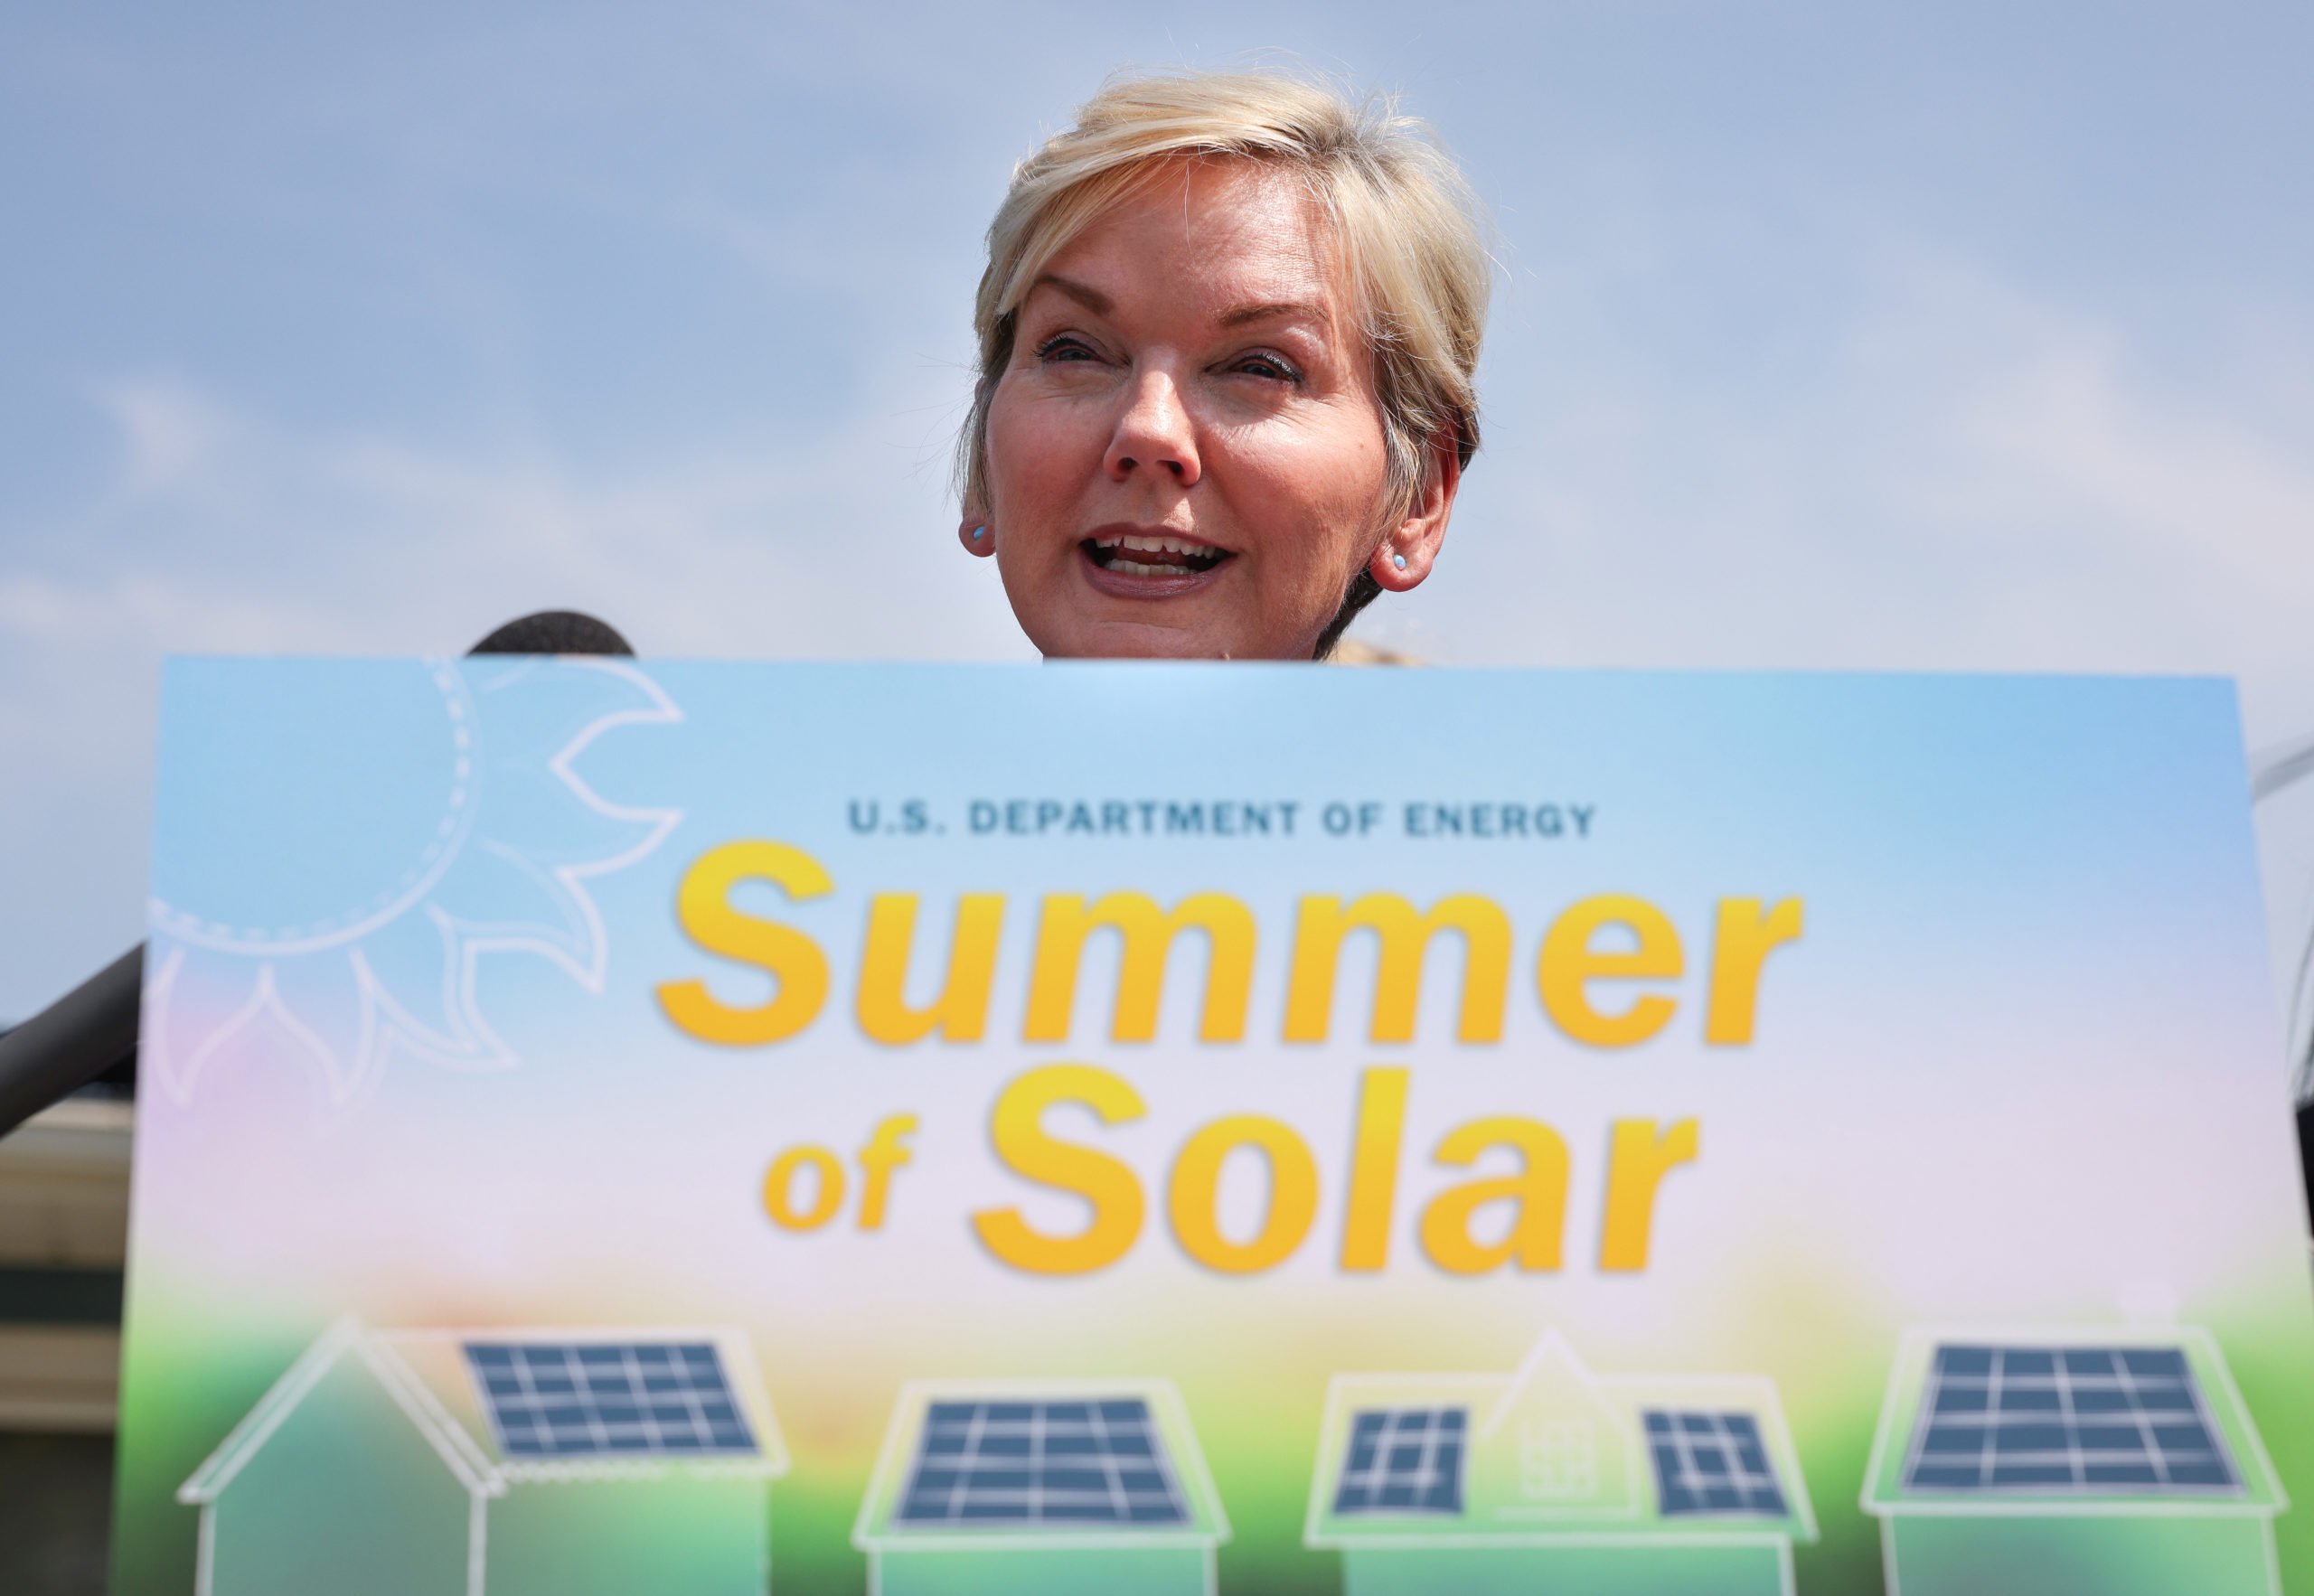 Energy Secretary Jennifer Granholm announces a new solar power program in July 2021 in Silver Spring, Maryland. (Kevin Dietsch/Getty Images)